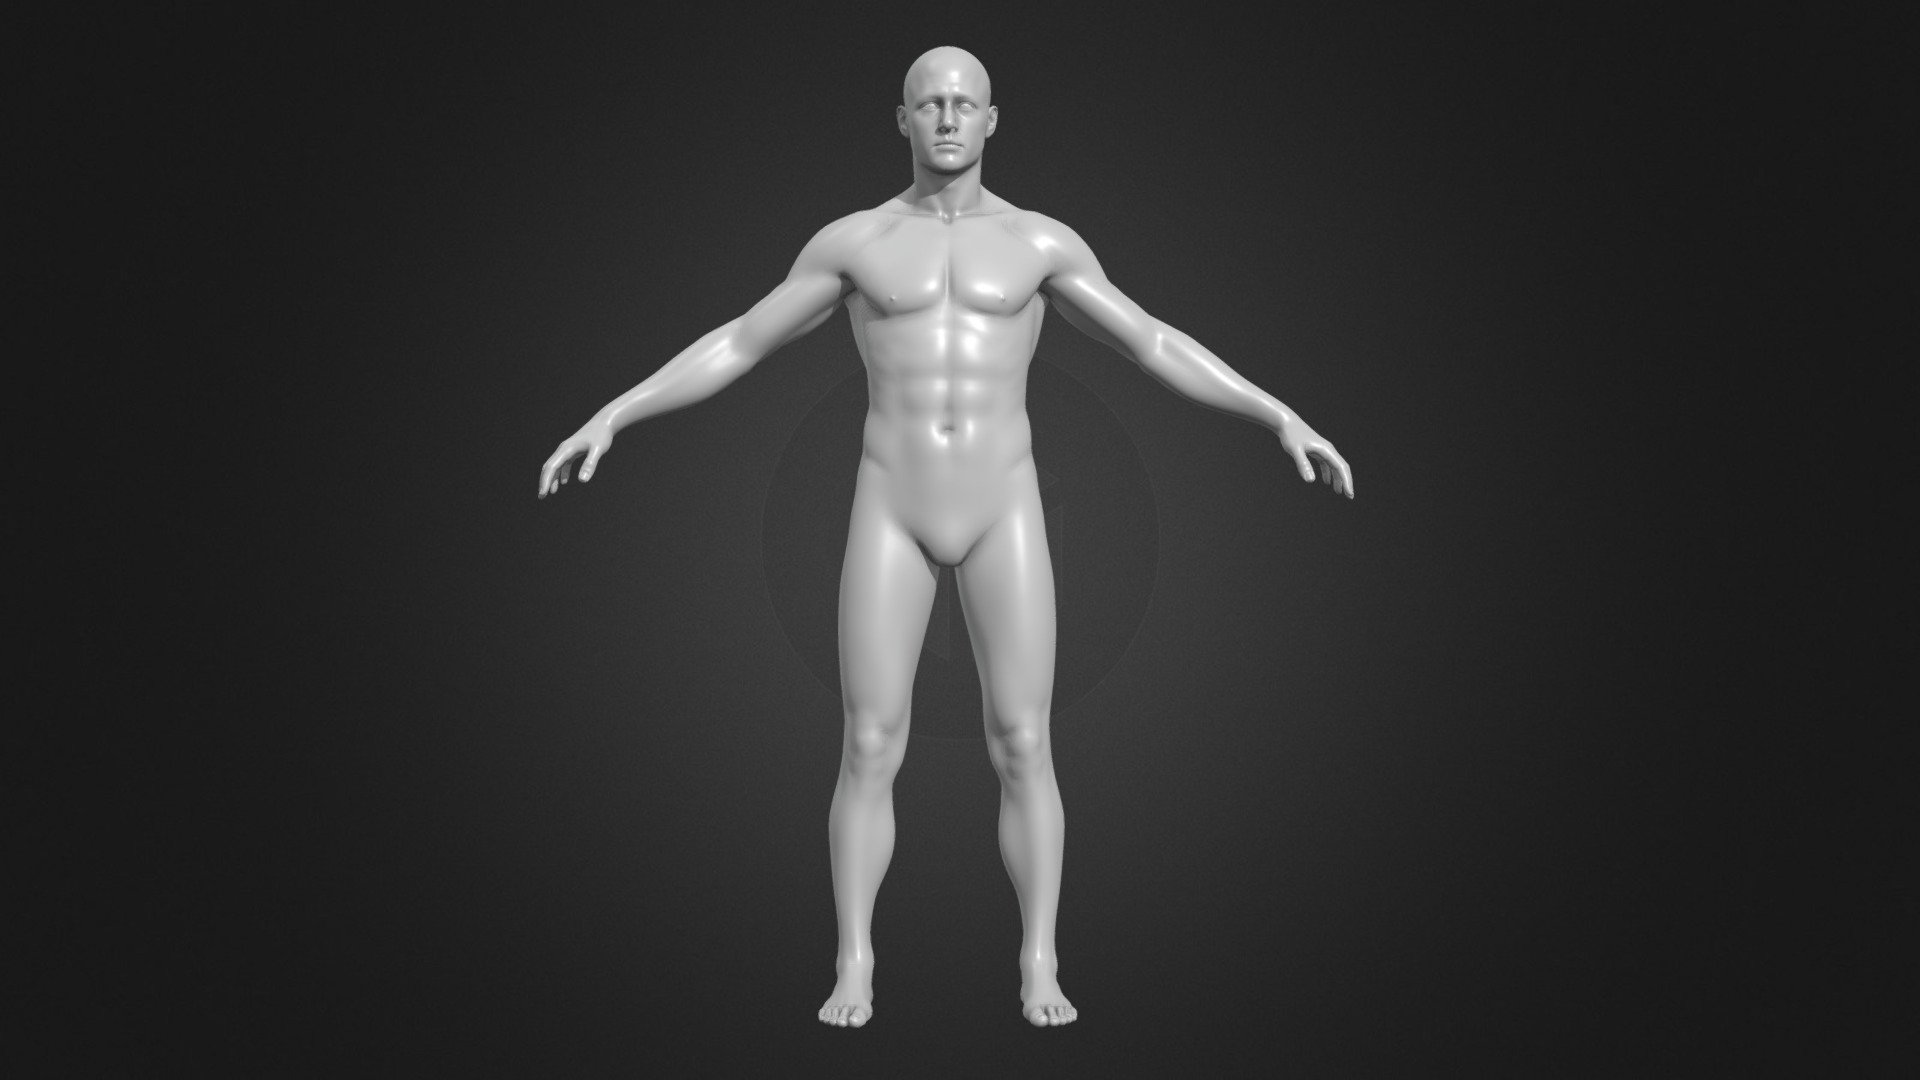 This is a standard human body model. It contains 68456 triangles and is a very standard low-poly human body model. It can be used for basic human body sculpting, bone binding, and other operations, with well-organized UV mapping, but may need to be repositioned according to personal preferences. It is available for download and use if needed 3d model